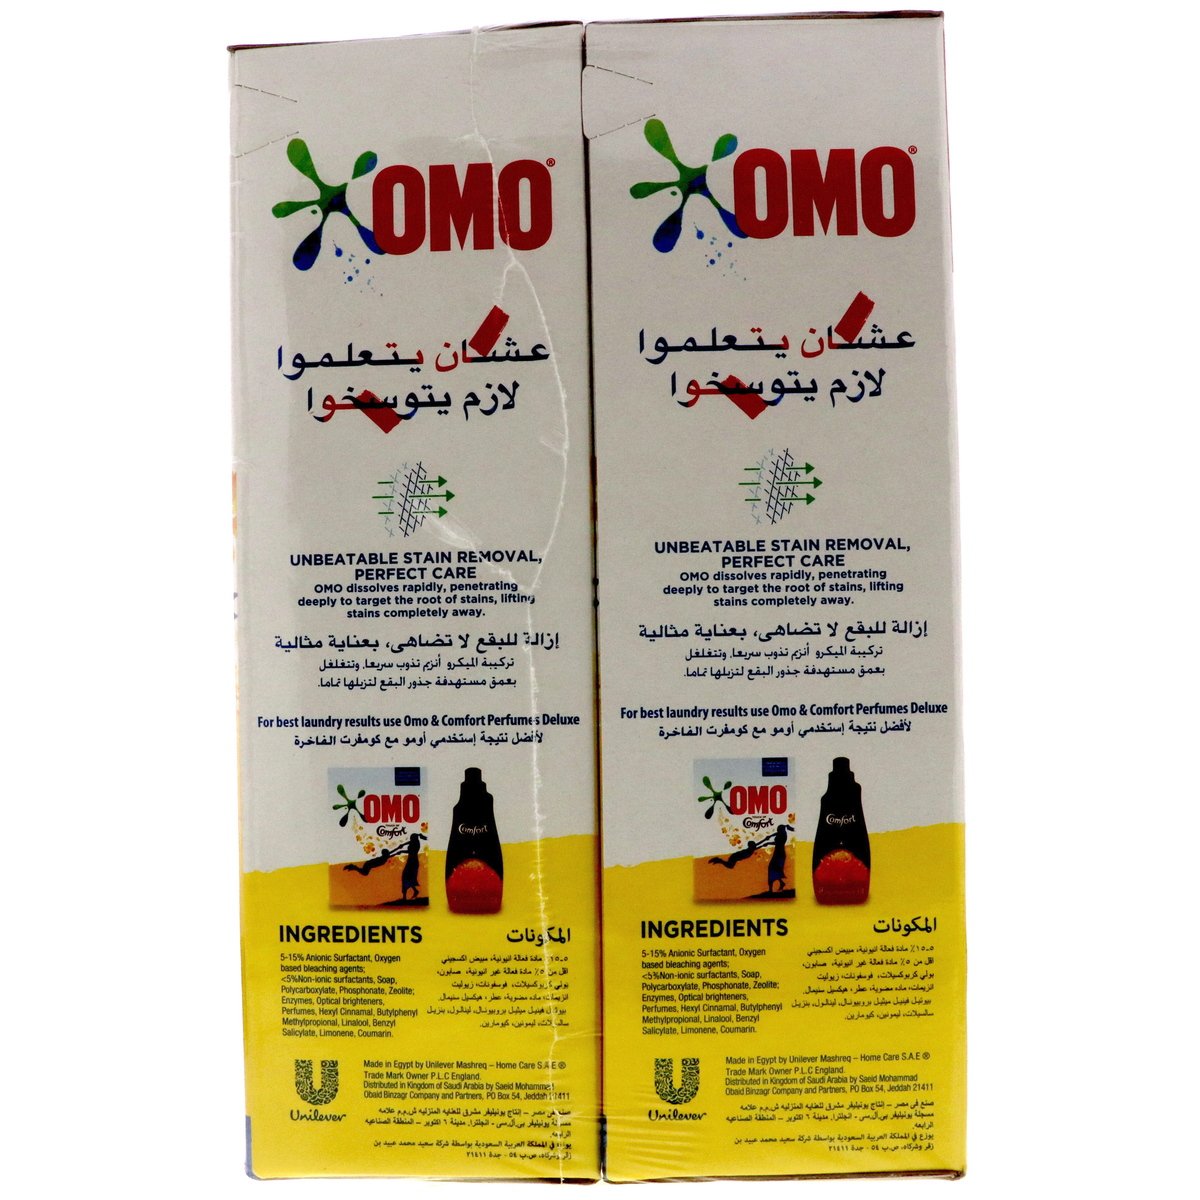 Omo Automatic Laundry Detergent Powder With Touch Of Comfort 2 x 2.5kg